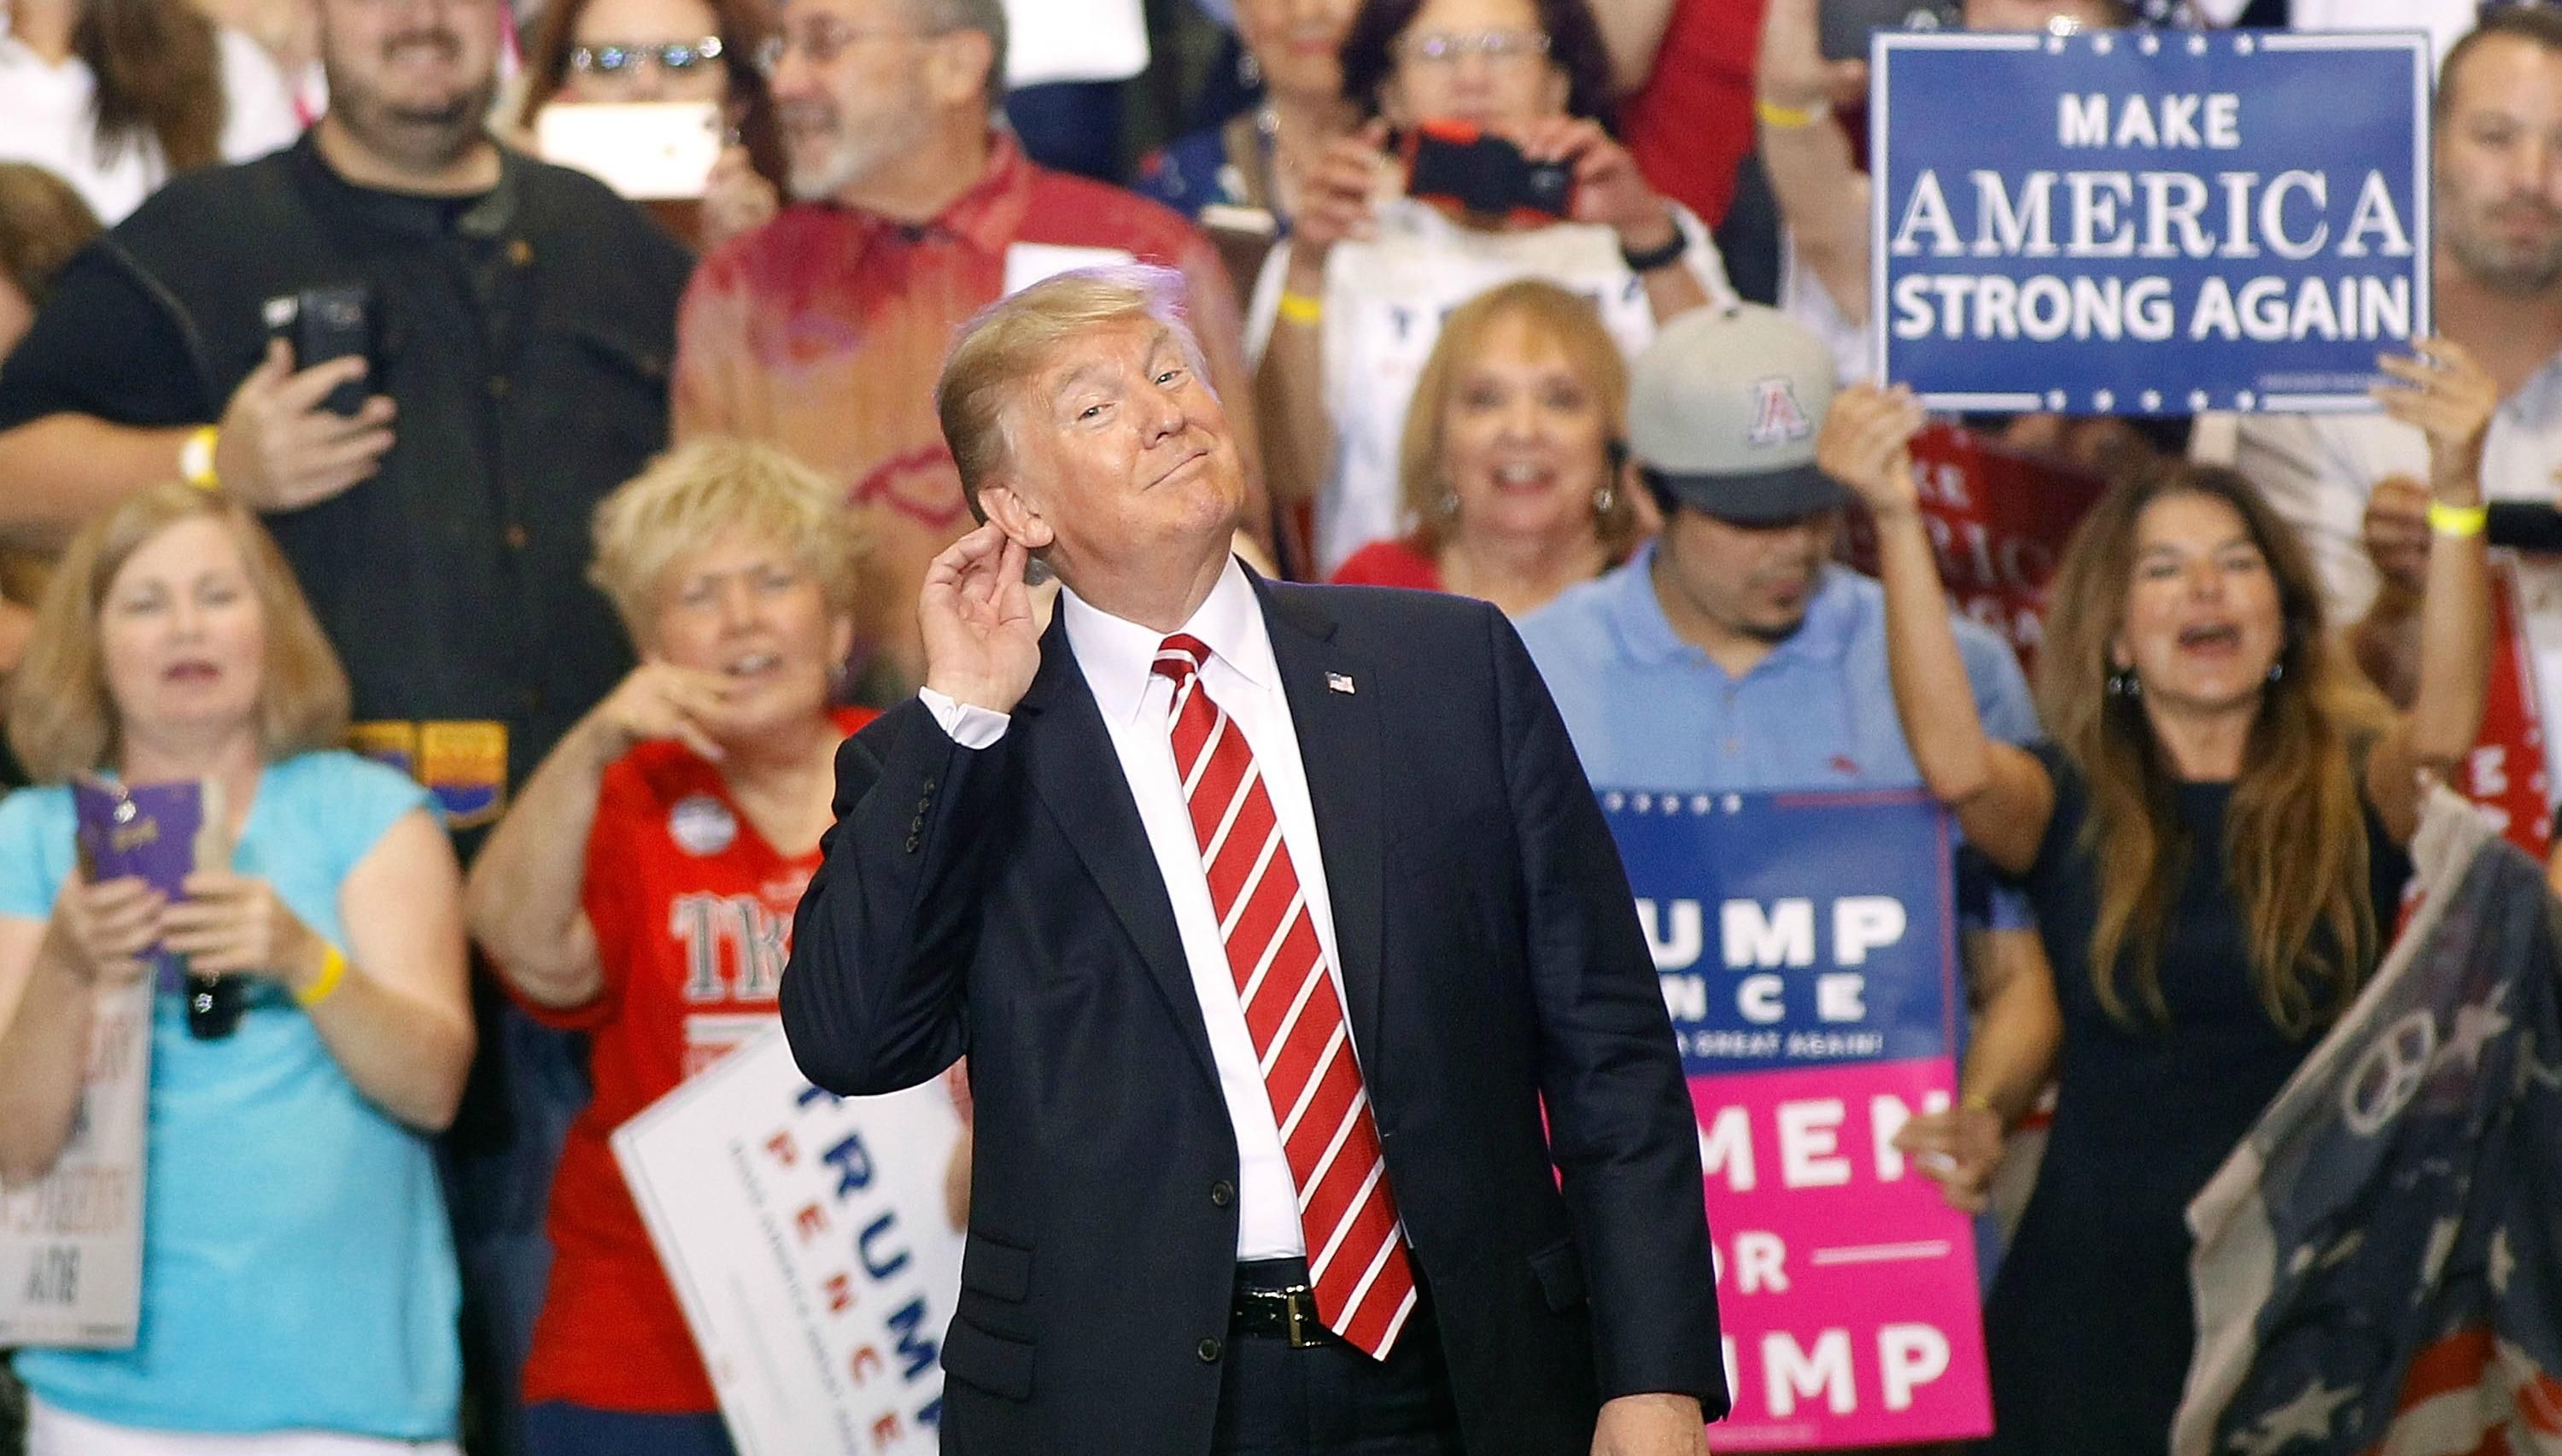 Trump's Tuesday evening speech in Phoenix, Arizona drew the latest comparisons between his campaign-style events and speeches given by autocrats like Adolf Hitler.